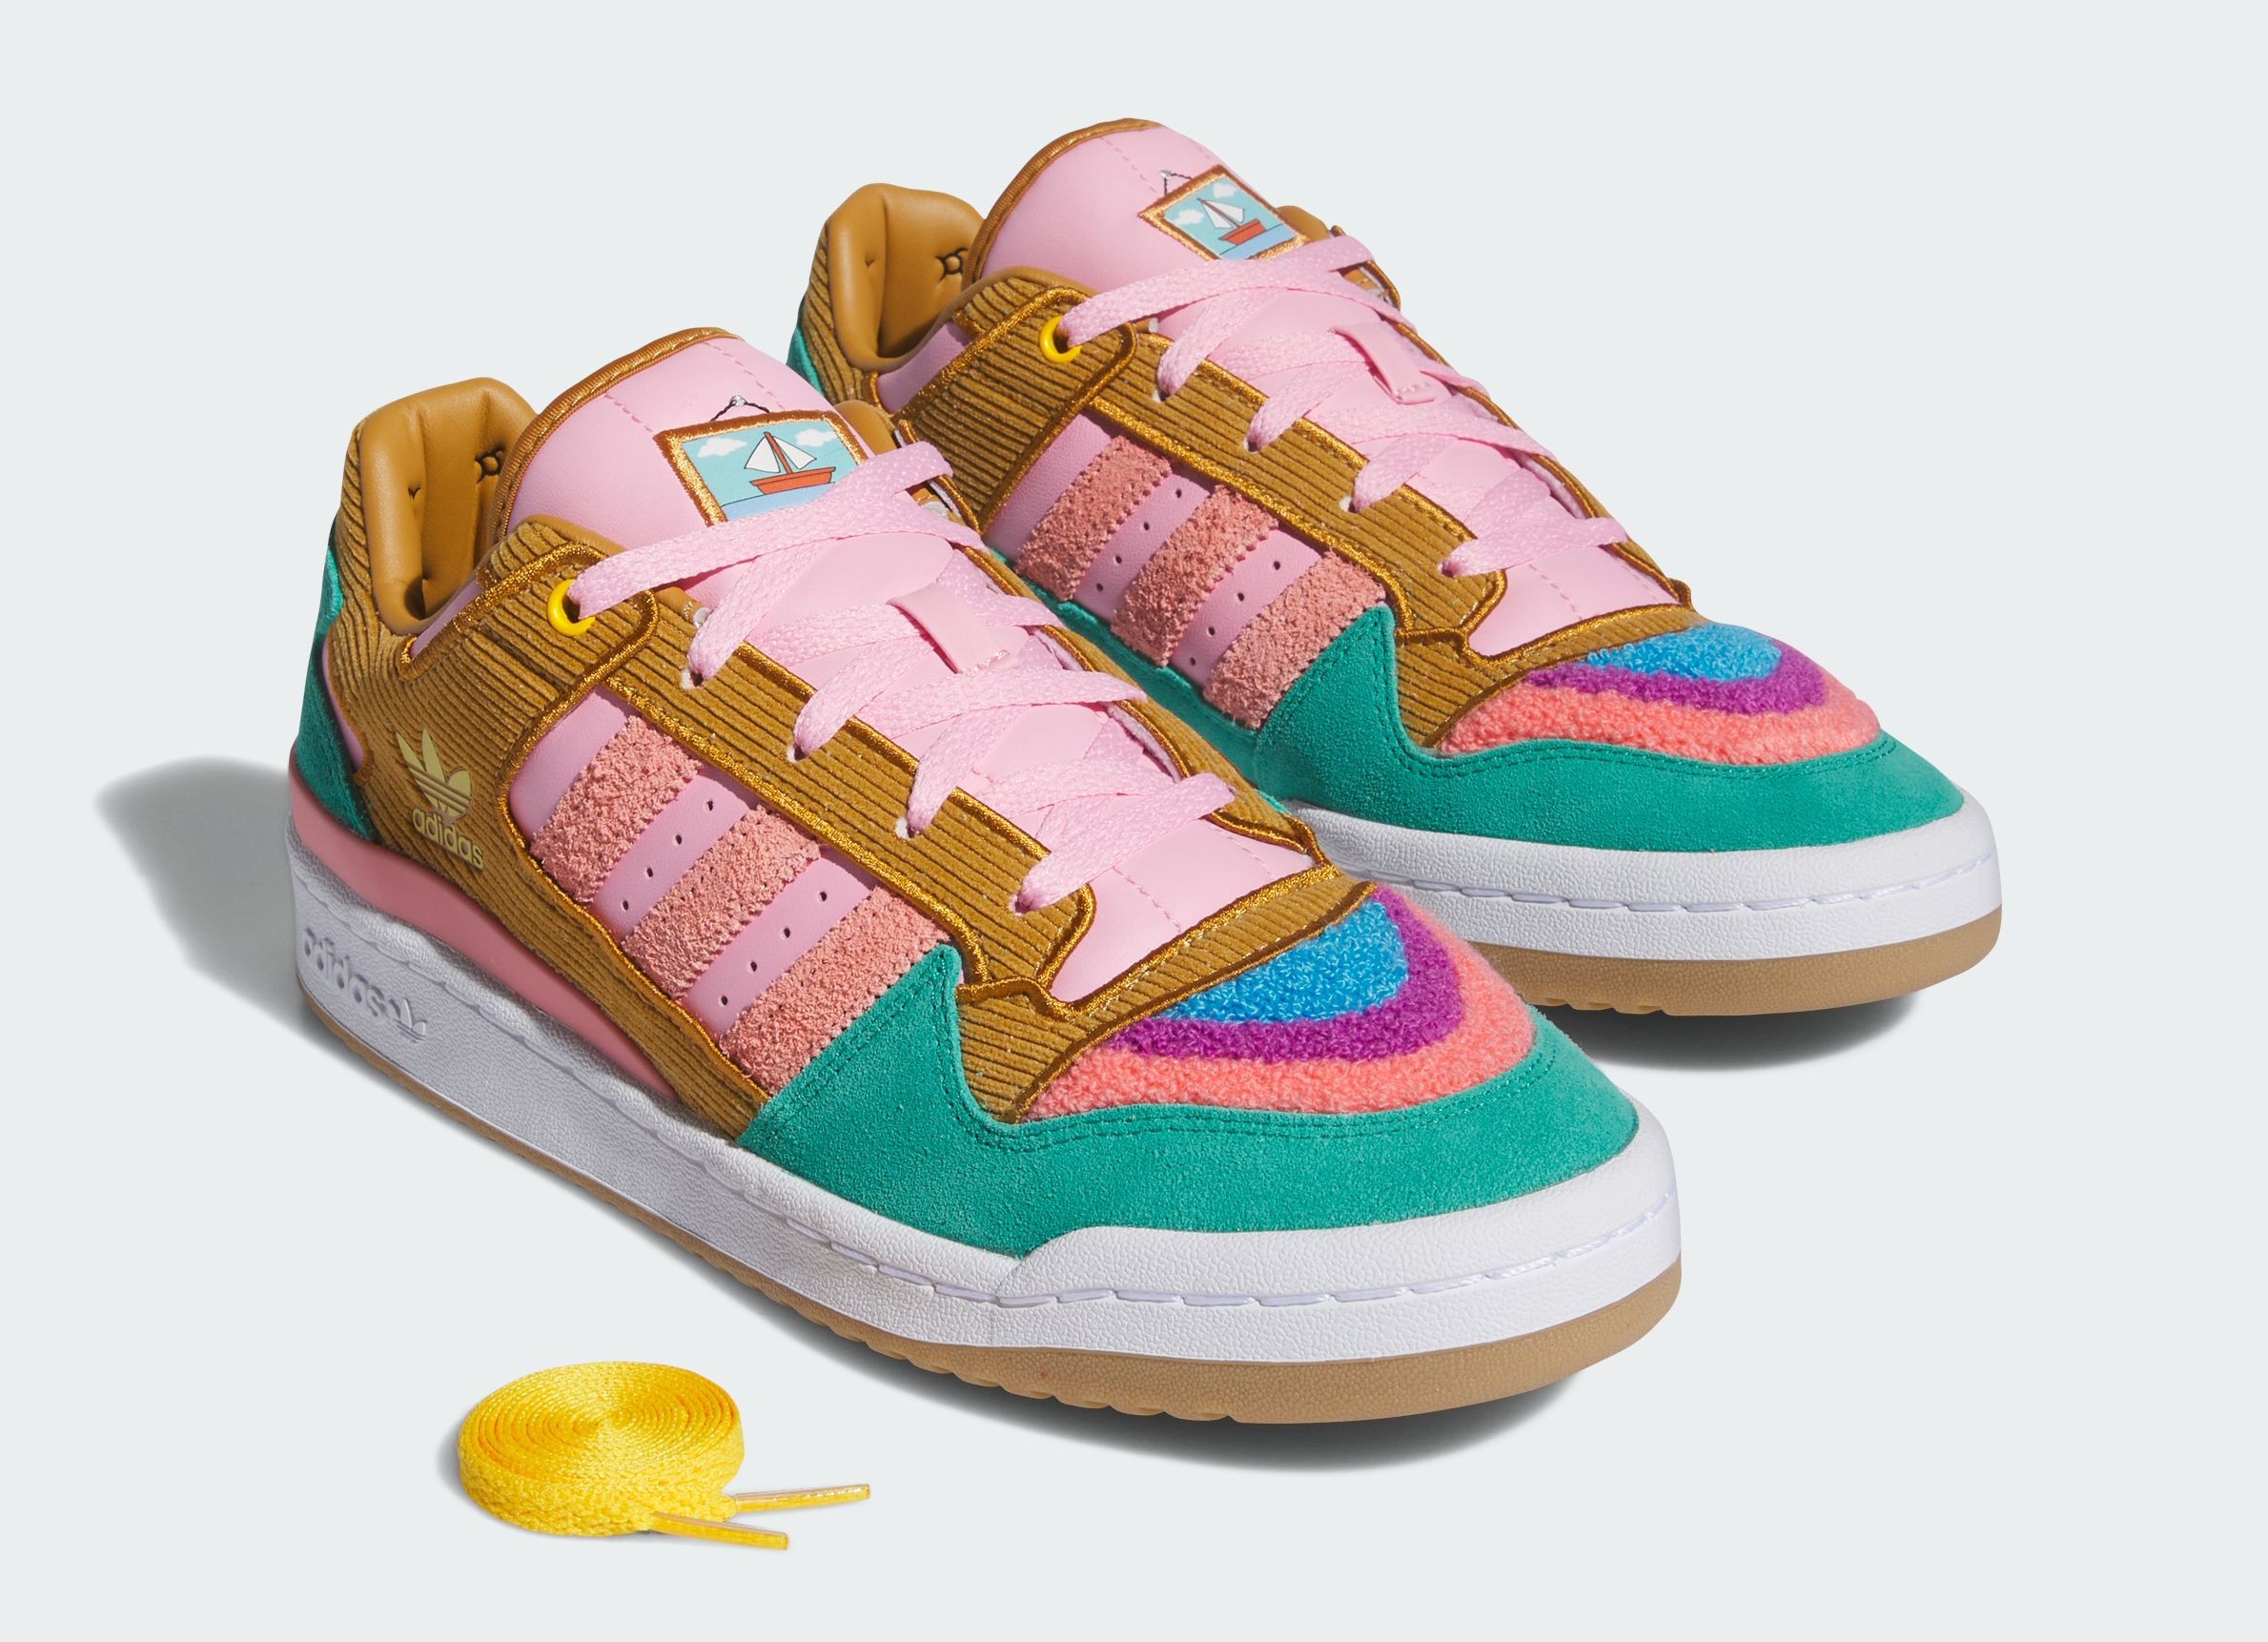 The Simpsons x Room” Low Coming | Adidas Forum “Living Heat° is Soon of House